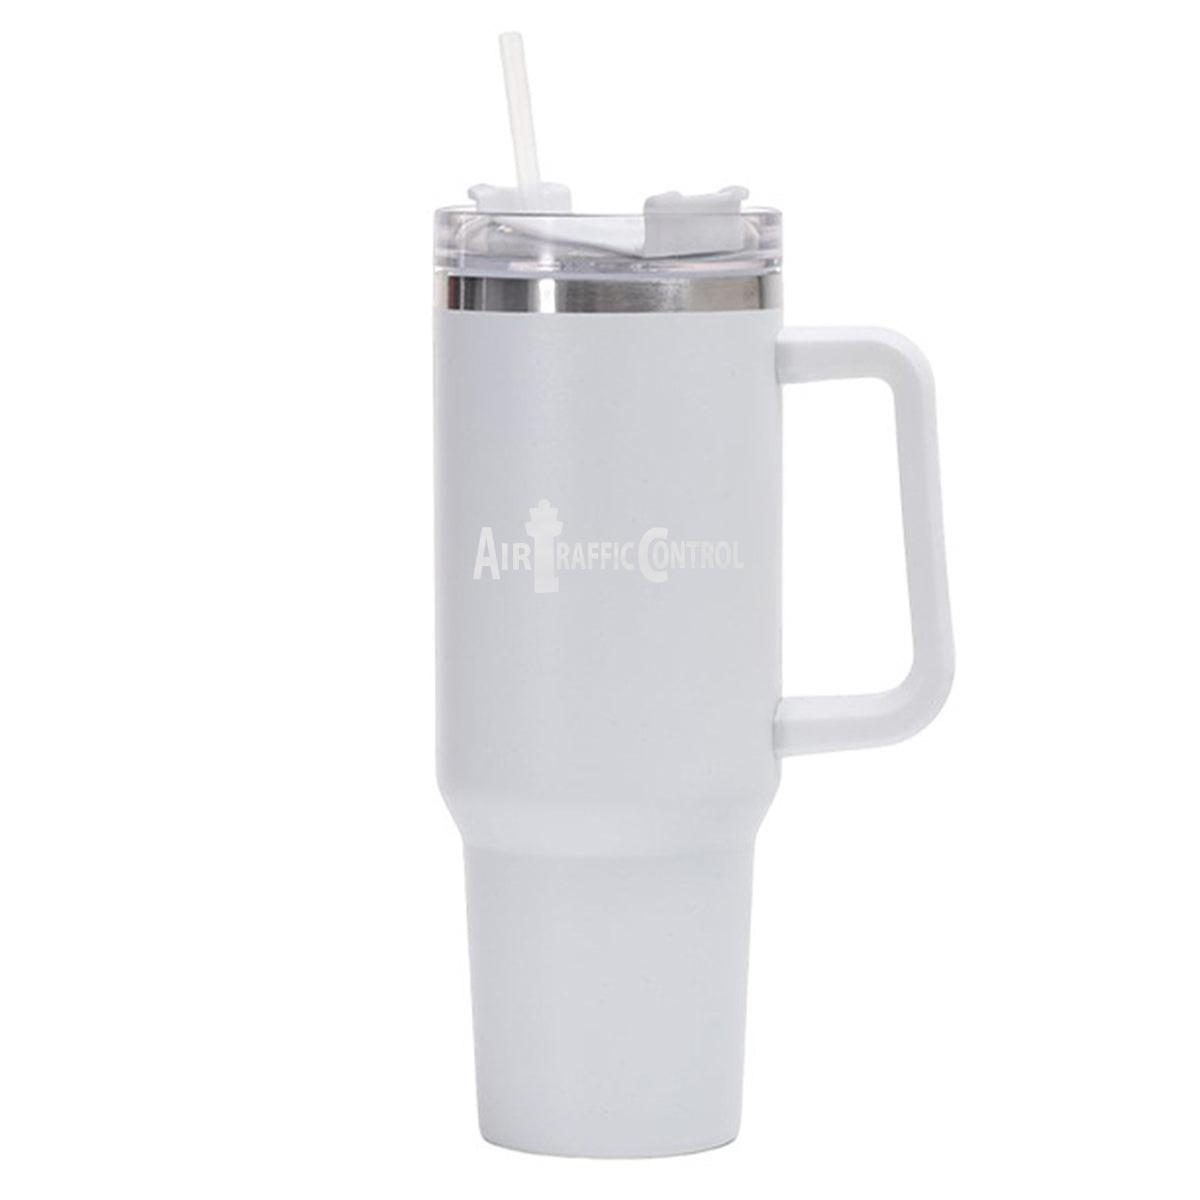 Air Traffic Control Designed 40oz Stainless Steel Car Mug With Holder